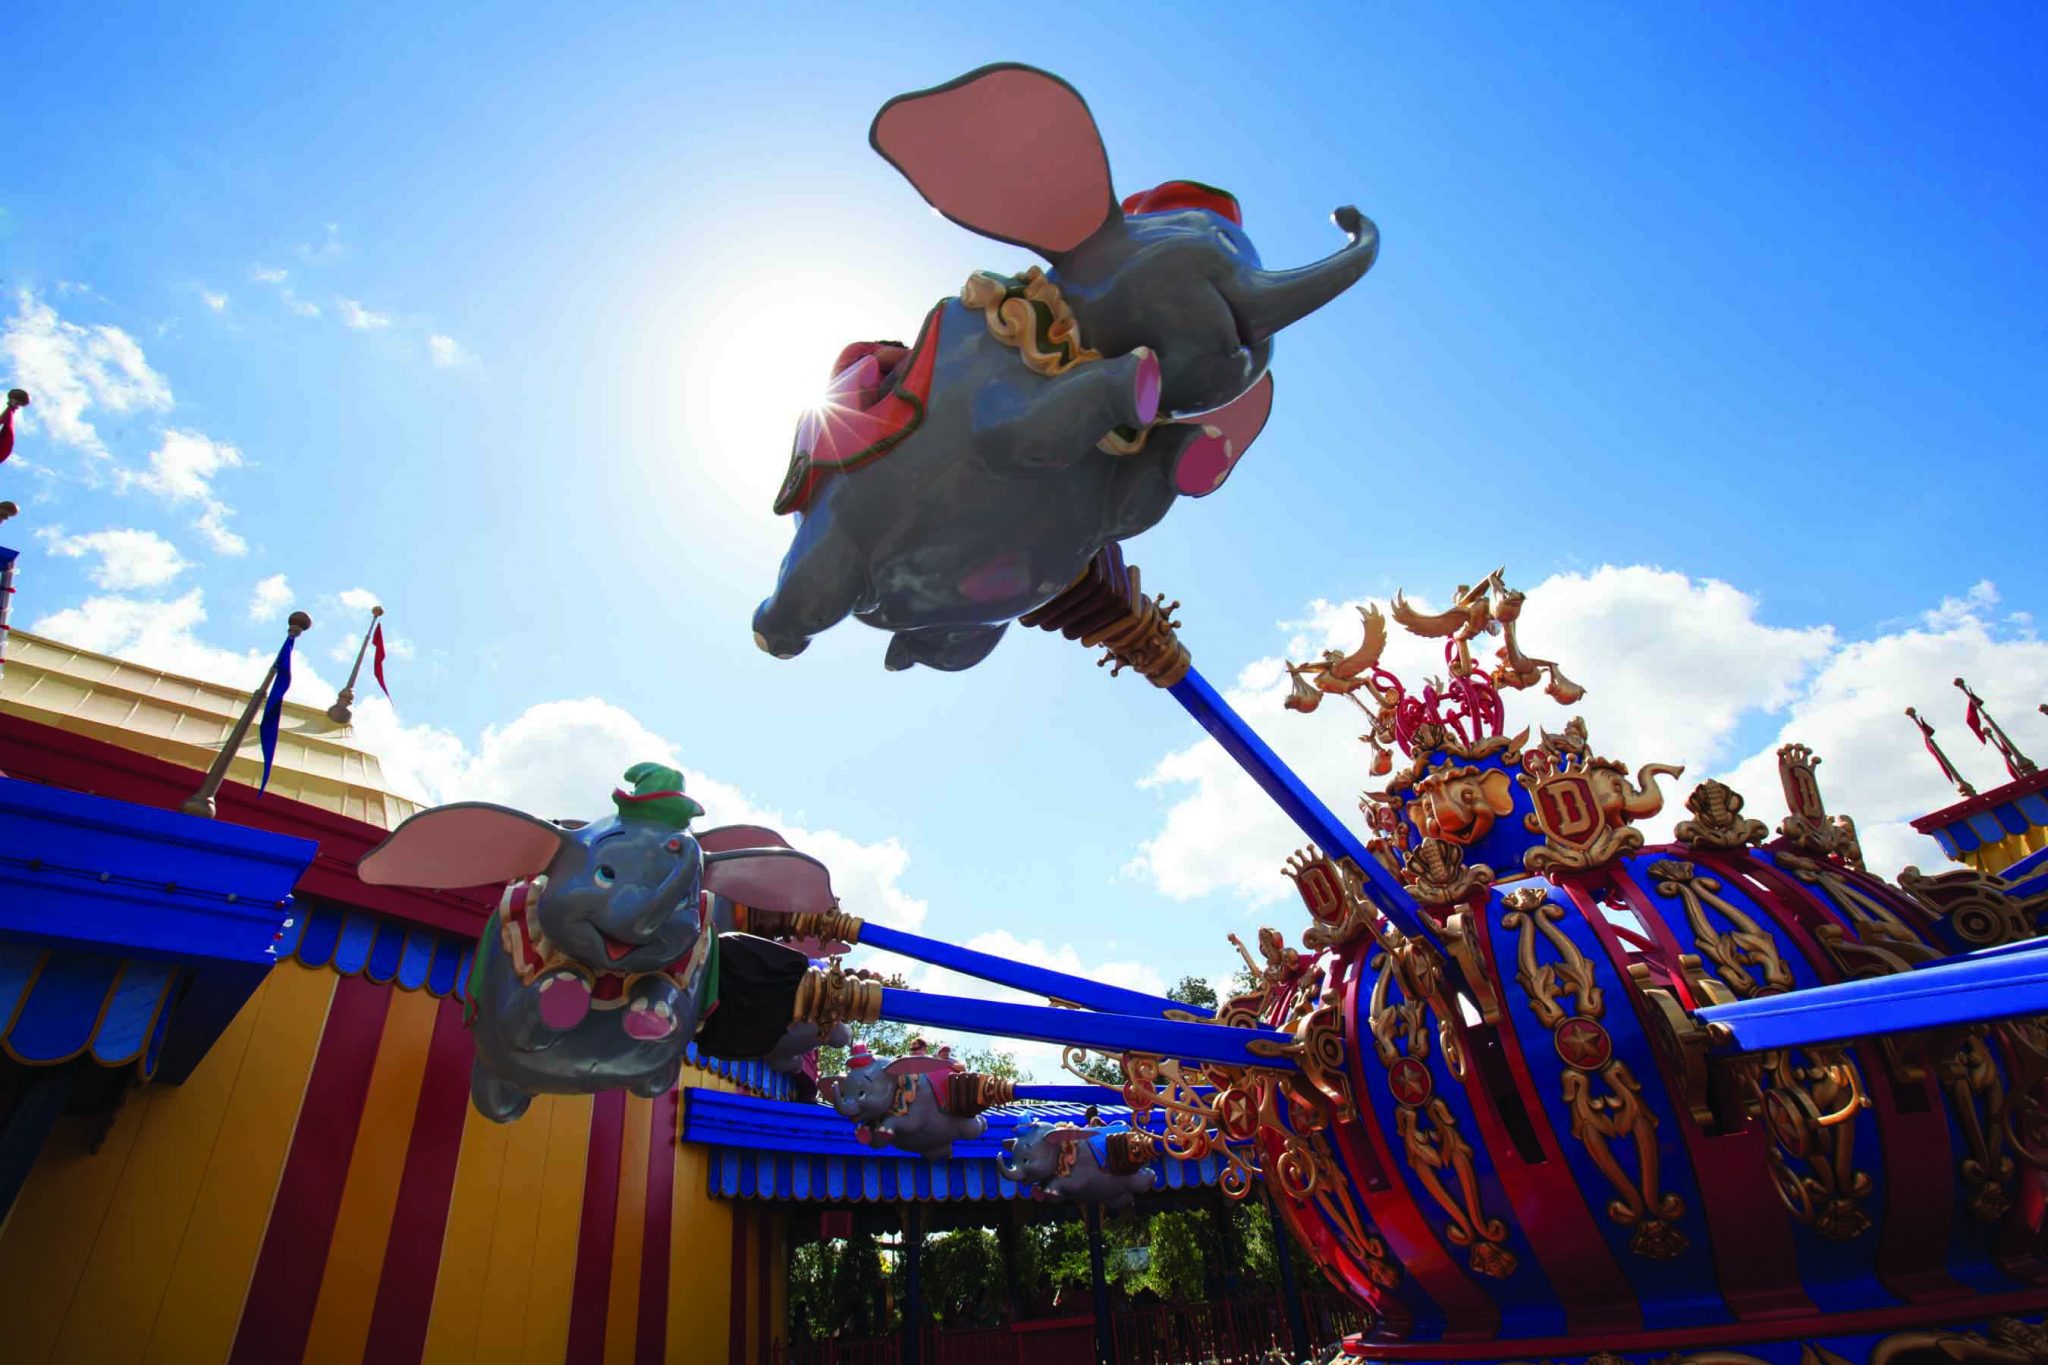 Guests take a spin on “Dumbo, the Flying Elephant” at Magic Kingdom Park. With an unprecedented two Dumbos aloft, guests get to their flights faster aboard one of the park’s most iconic attractions. Connecting the two Dumbos, a new “big top” area allows guests to immerse themselves in circus lore in a series of fun, interactive experiences before a spin with their favorite circus elephant. The double Dumbos help anchor the Storybook Circus area of New Fantasyland at Magic Kingdom Park — part of the largest expansion in Magic Kingdom history. (Disney)